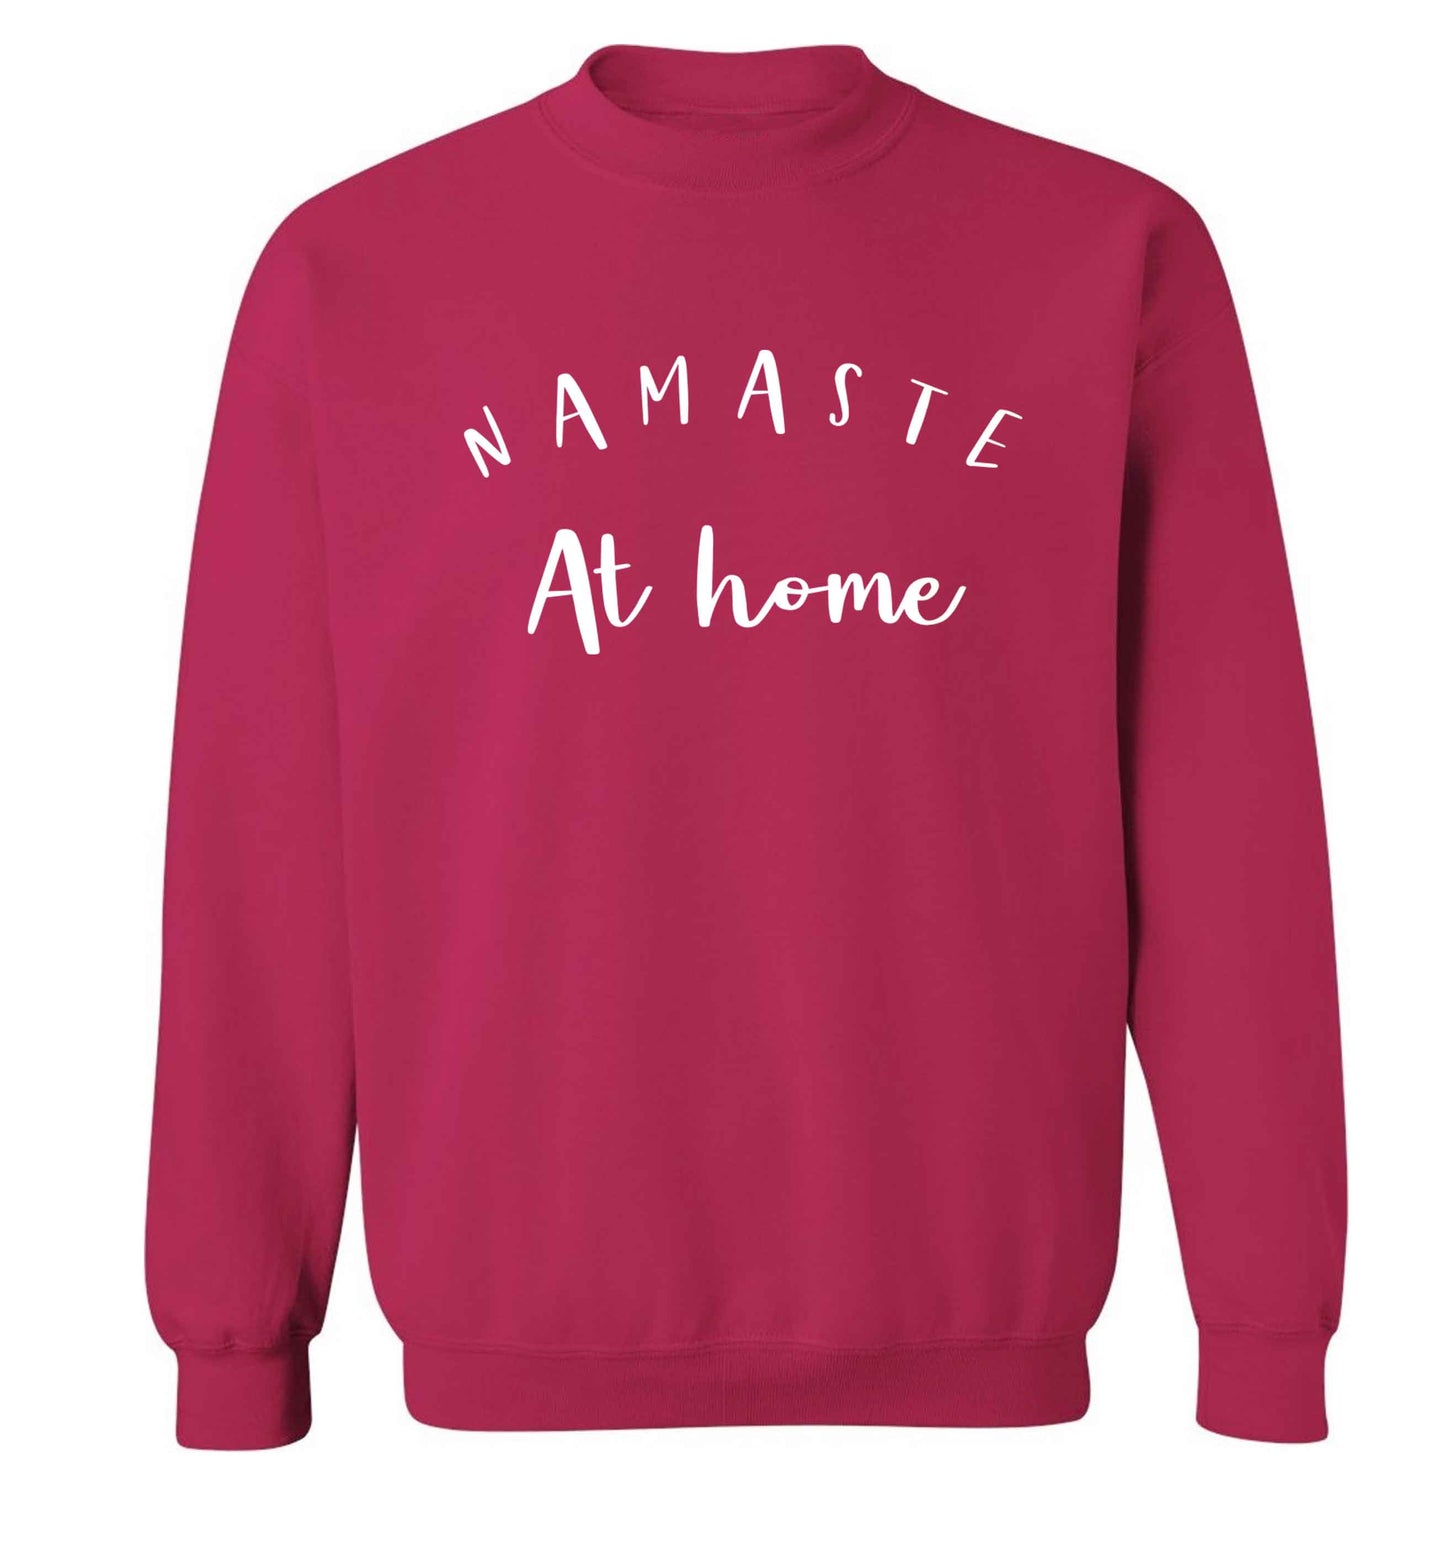 Namaste at home Adult's unisex pink Sweater 2XL